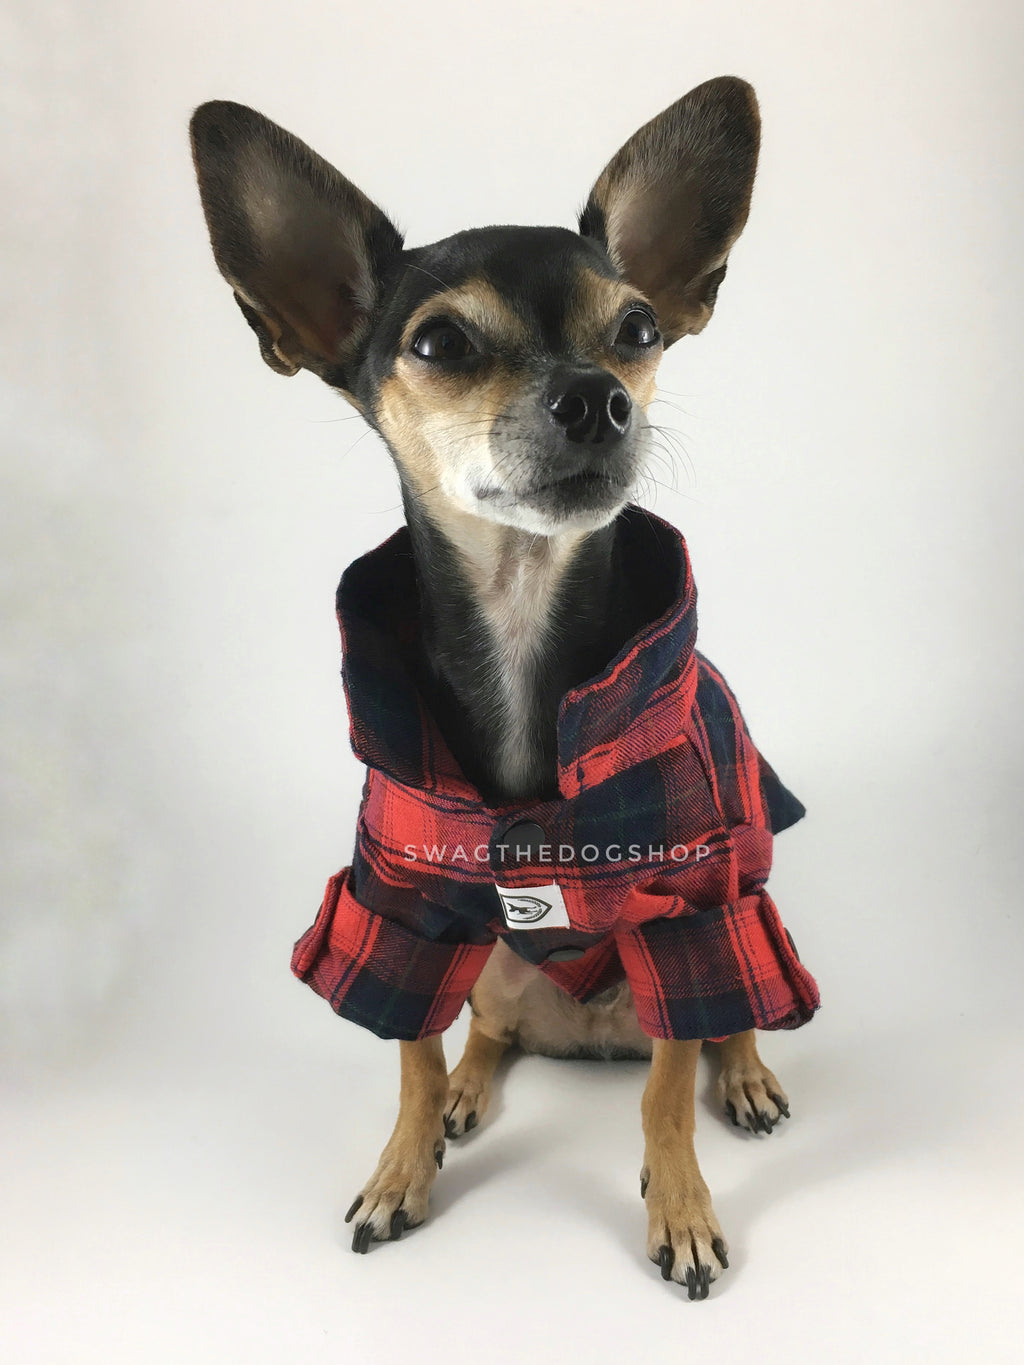 True North Red Plaid Shirt - Full Front View of Cute Chihuahua Dog Wearing Shirt with Sleeves Rolled Up. Red Plaid Shirt